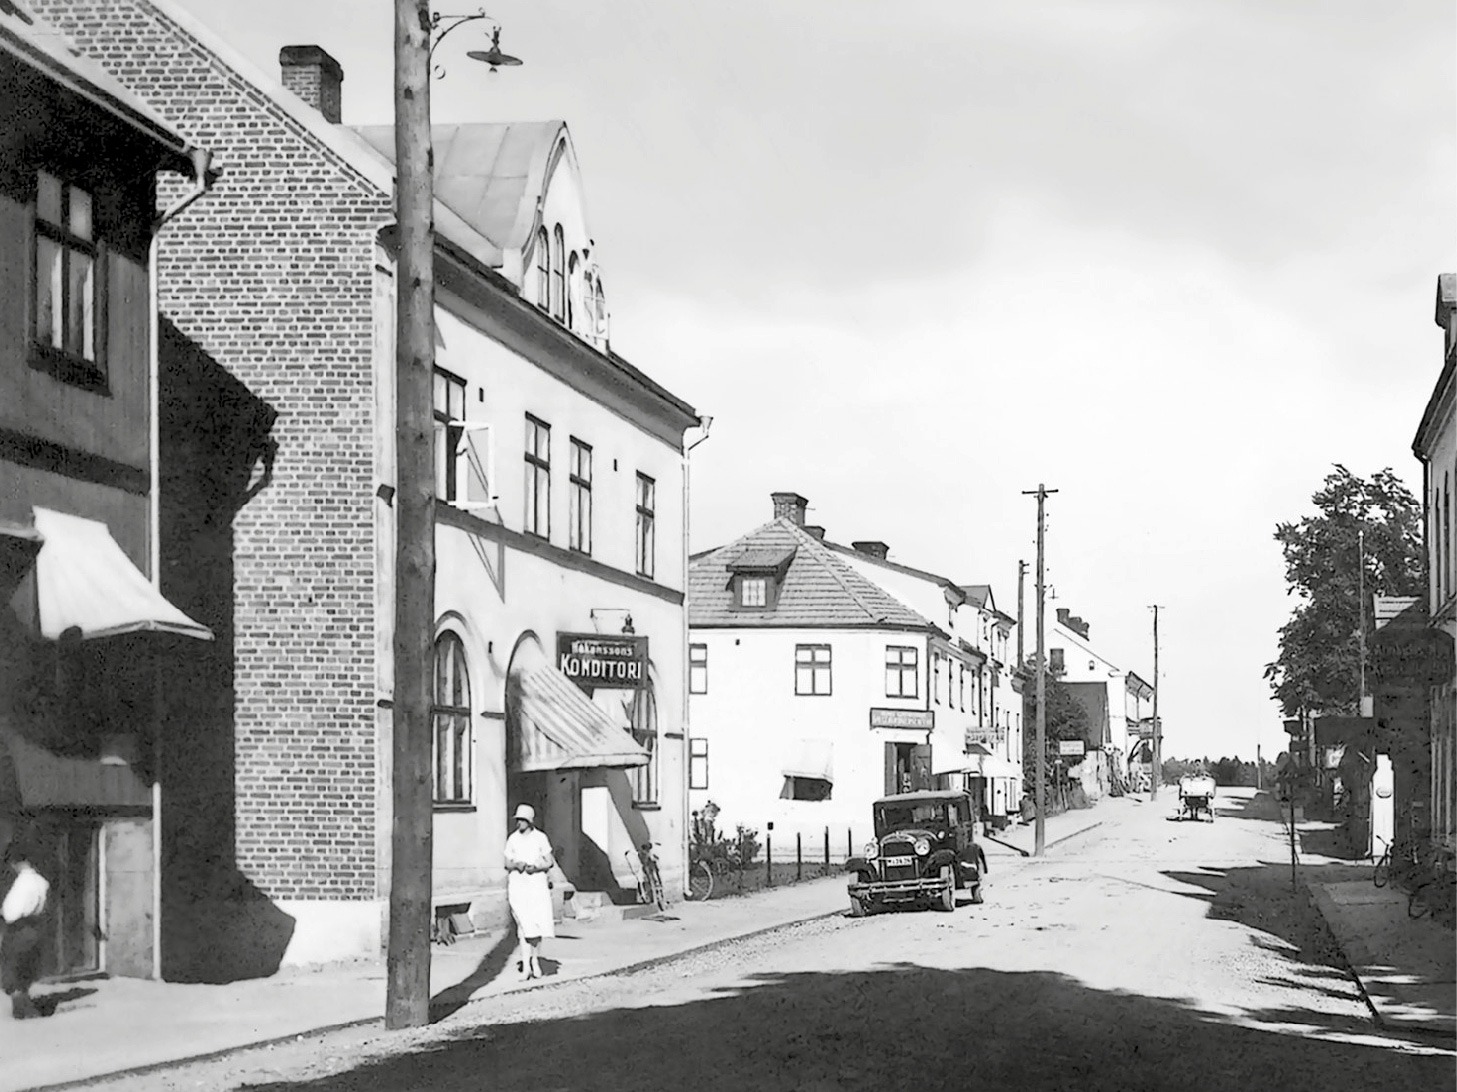 Quiet Swedish street in the 1930s, a woman dressed in white on the sidewalk, one parked car, one car coming down the street.